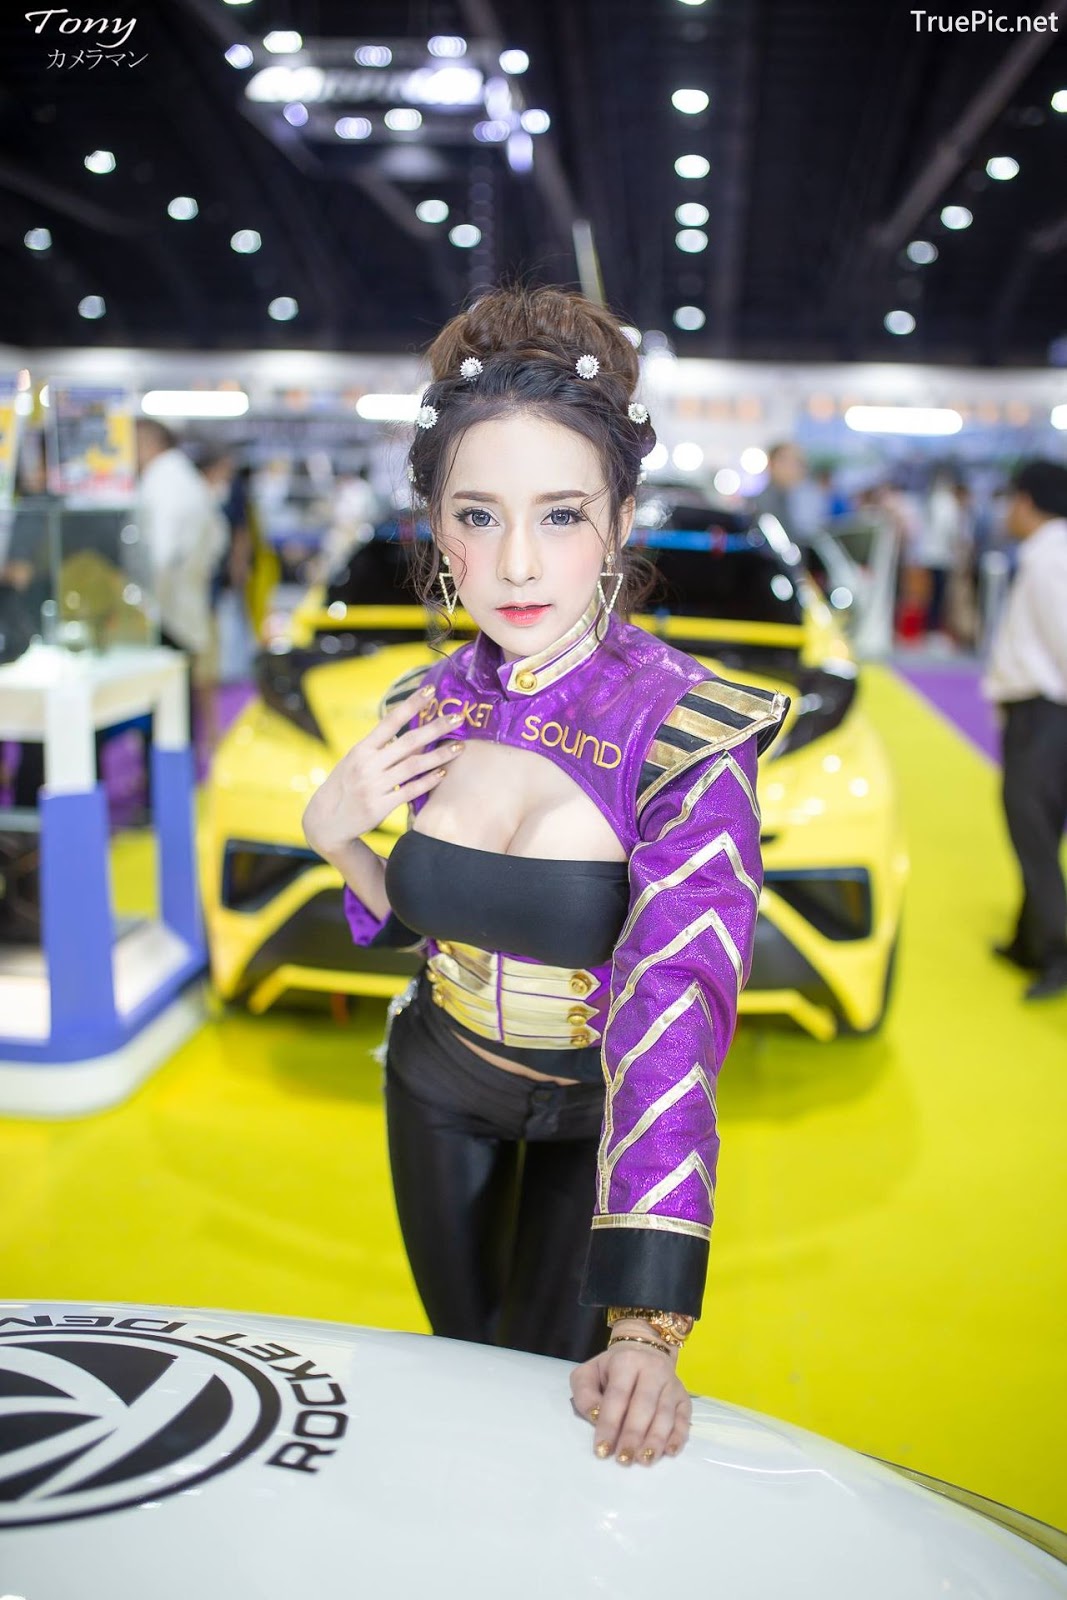 Image-Thailand-Hot-Model-Thai-Racing-Girl-At-Motor-Expo-2018-TruePic.net- Picture-91